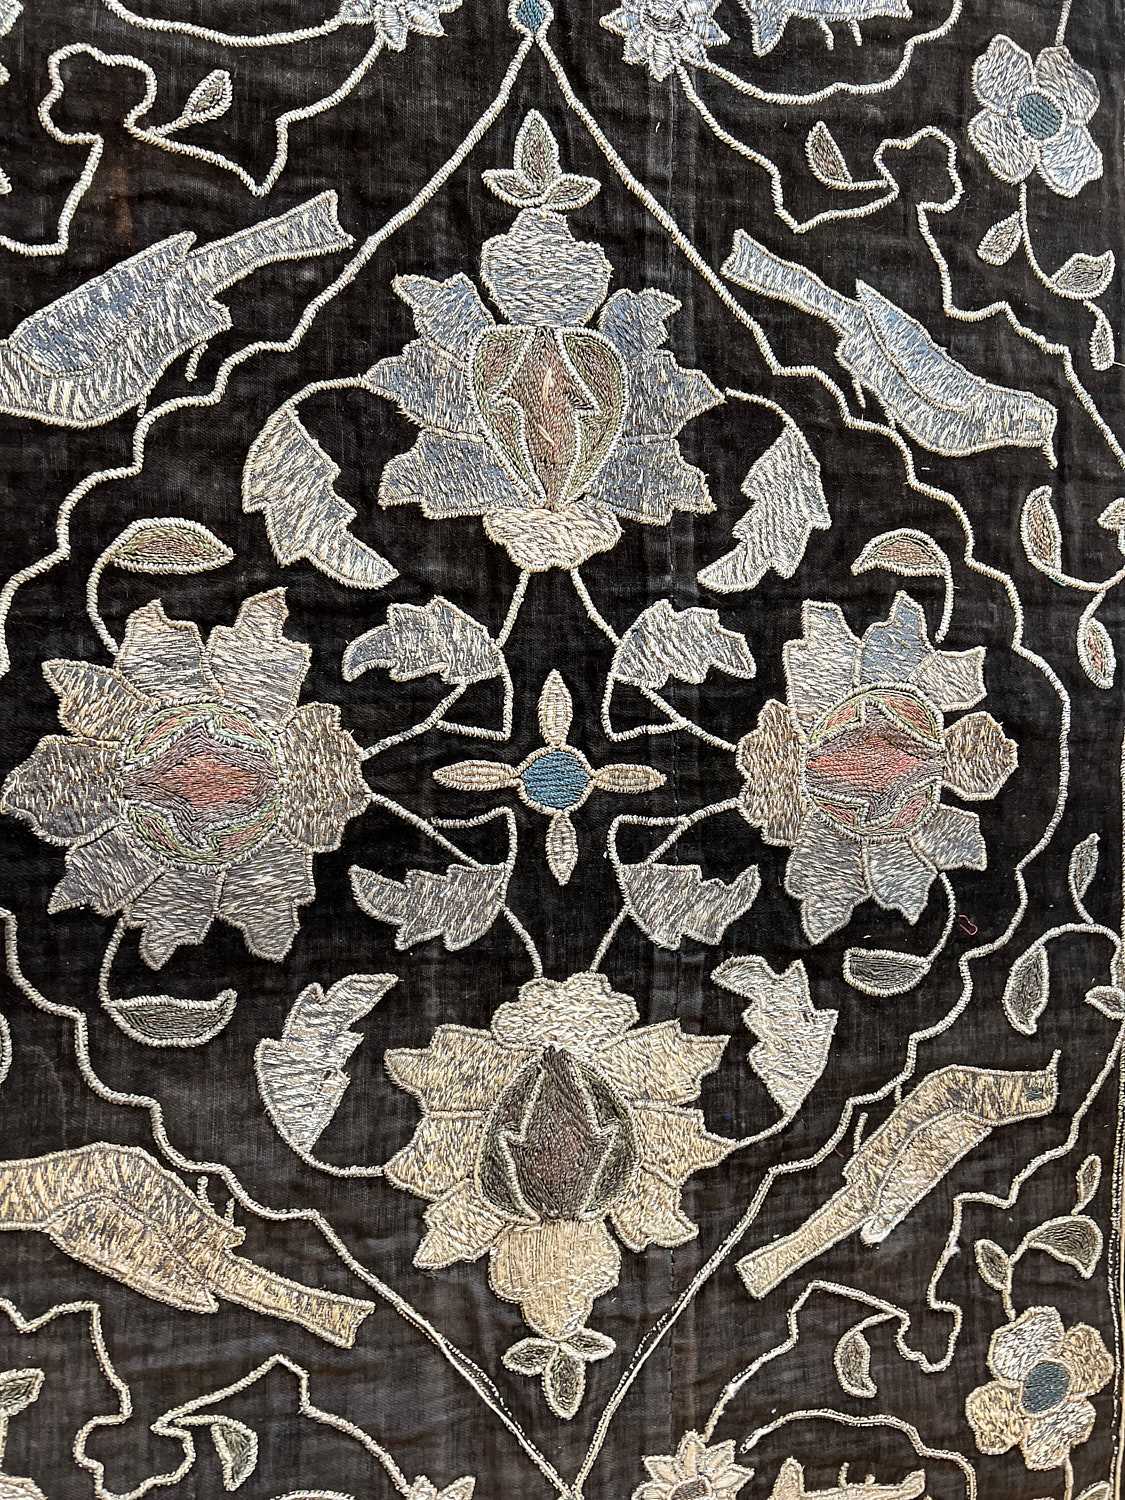 AN EARLY 19TH CENTURY OTTOMAN VELVET AND METAL THREAD TEXTILE, PERSIAN - Image 6 of 8